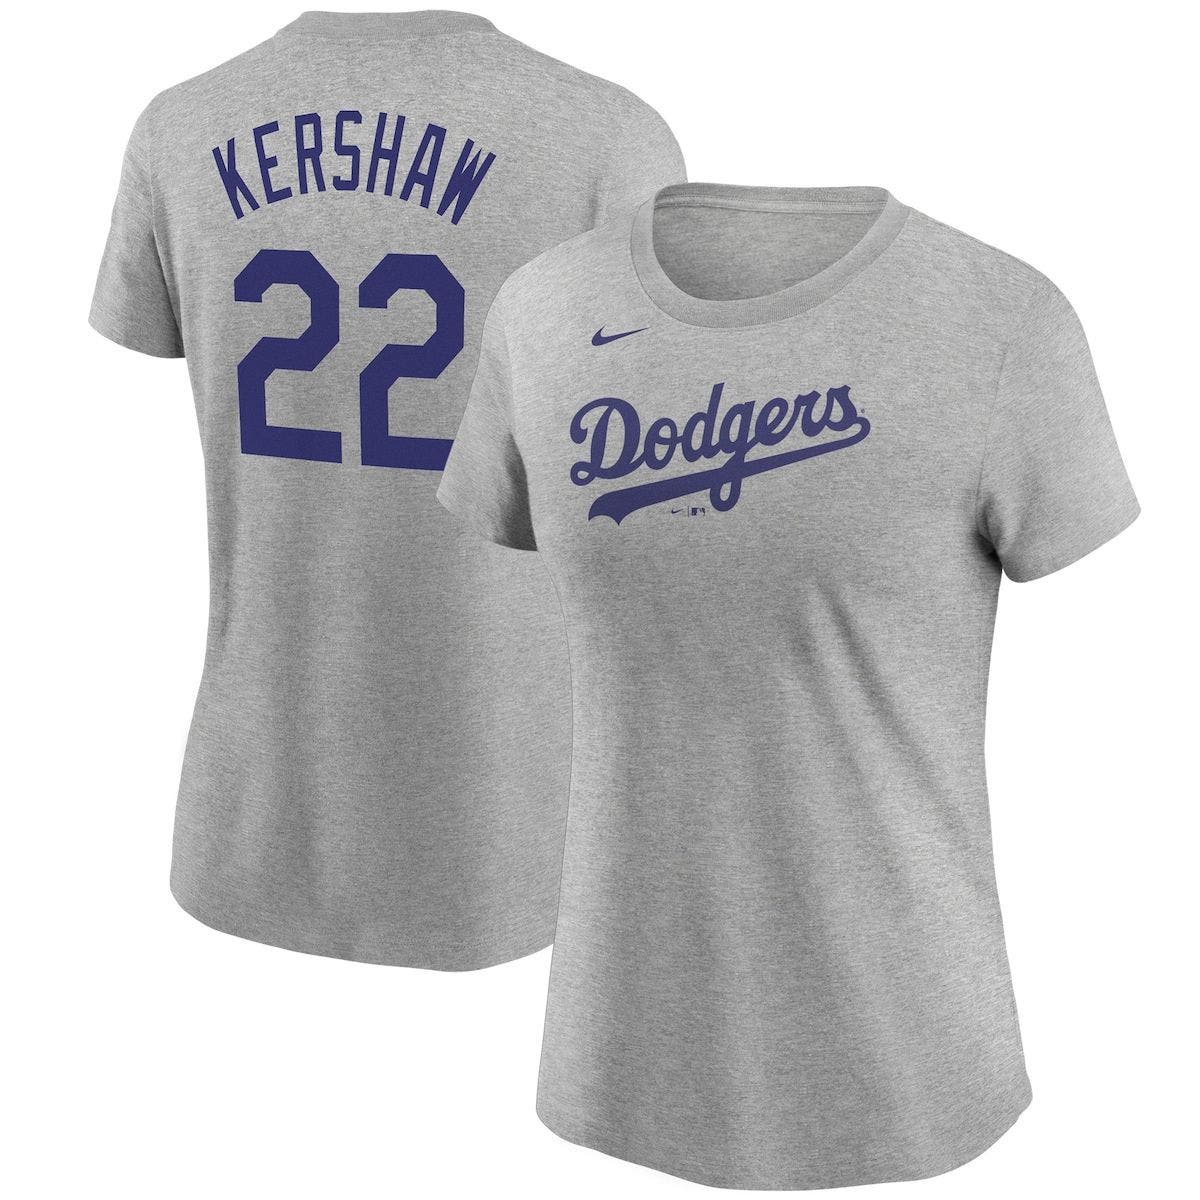 Los Angeles Dodgers kershaw 22 baseball white adult jersey brand new 